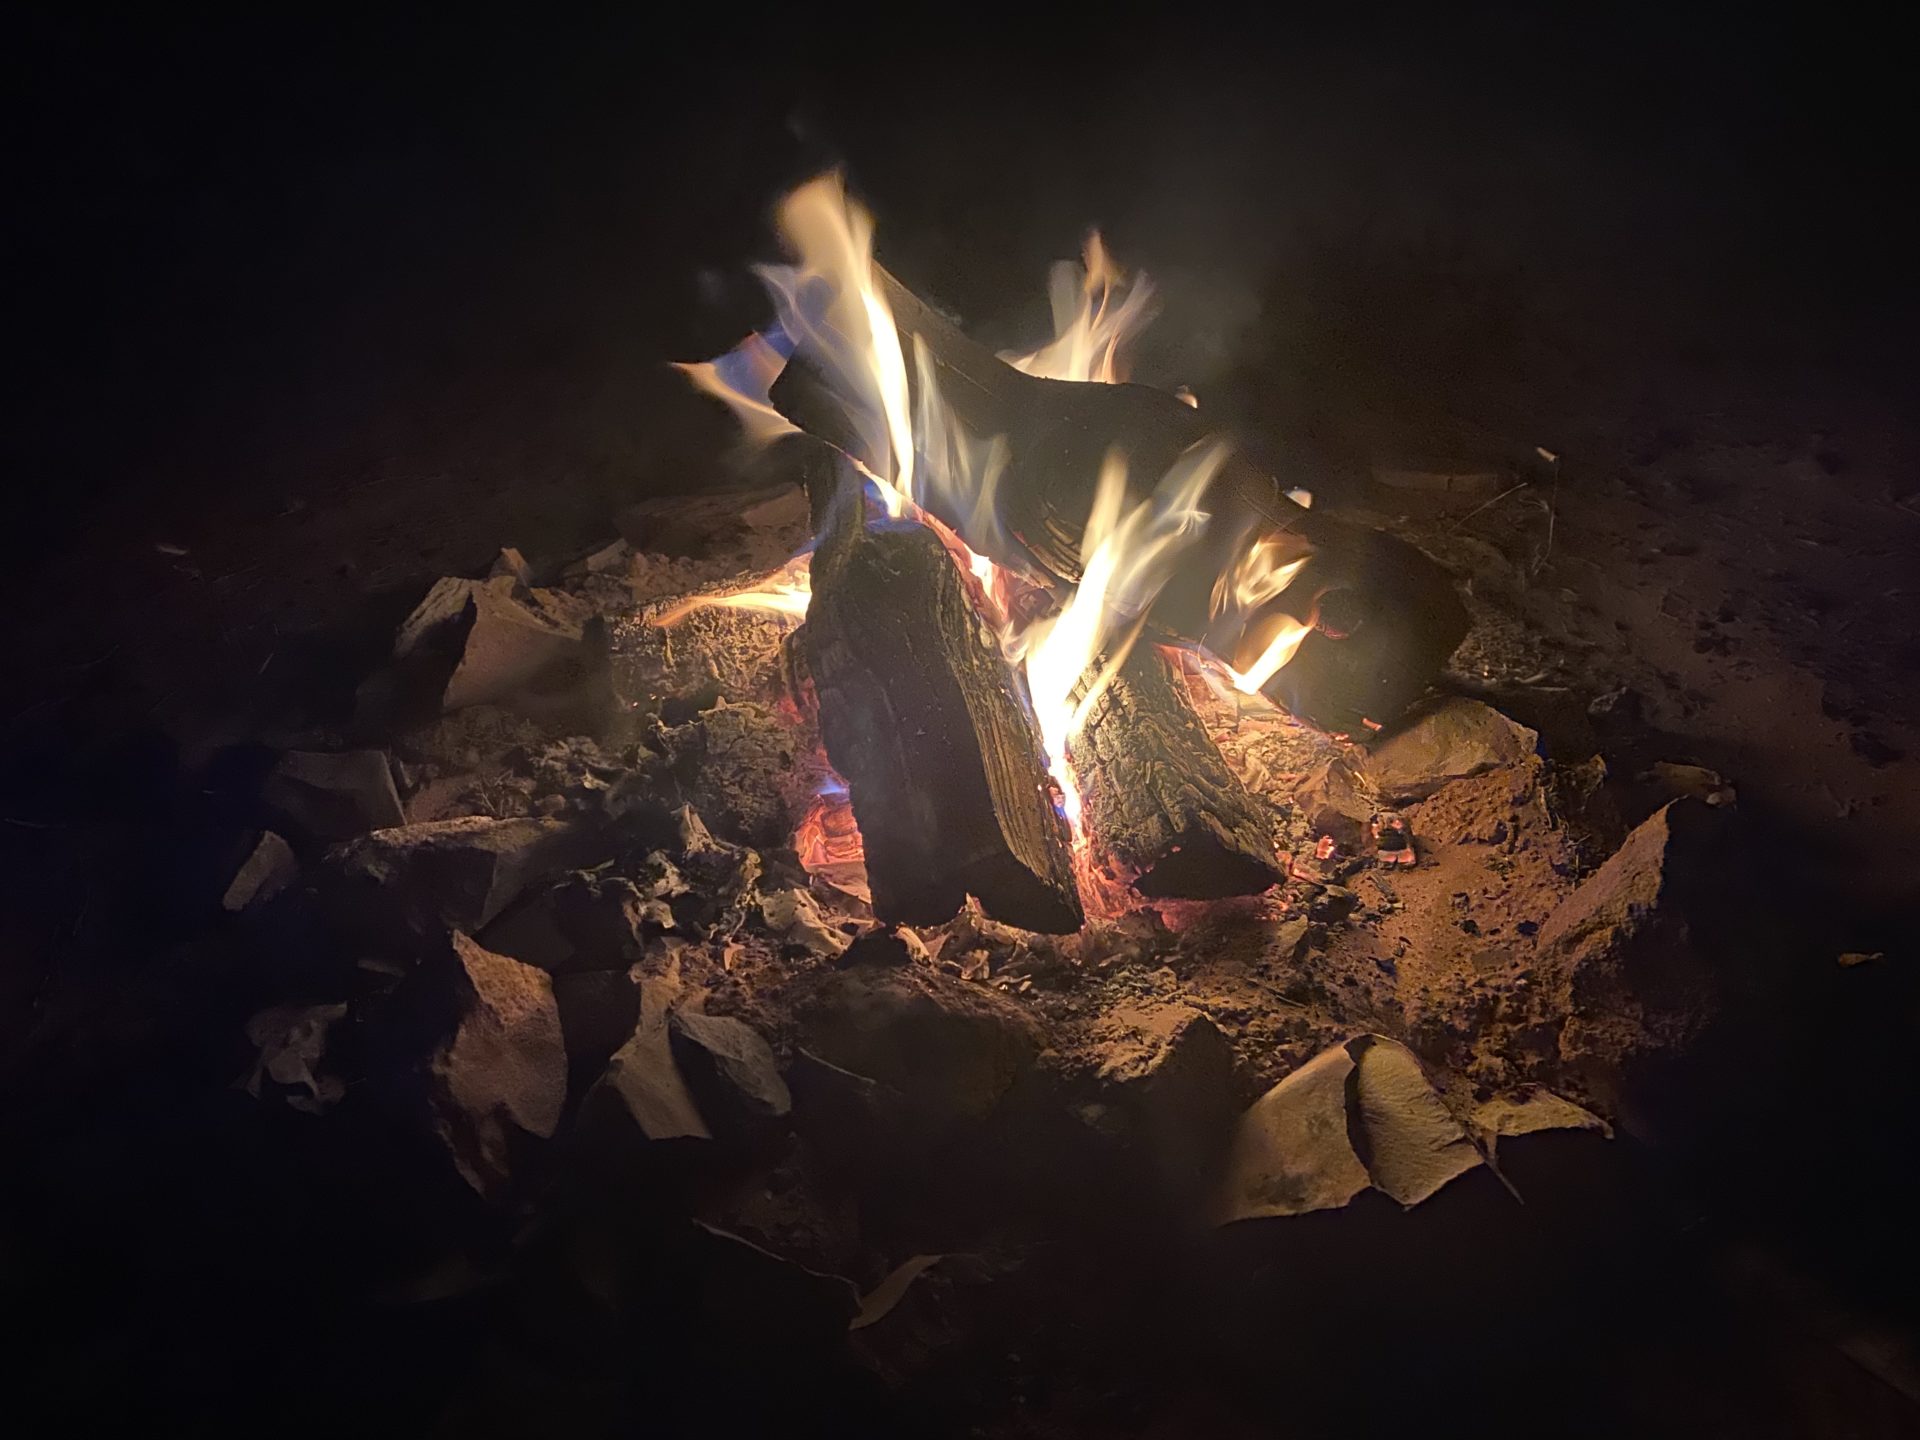 Is It Time to Ditch the Campfire Tradition?